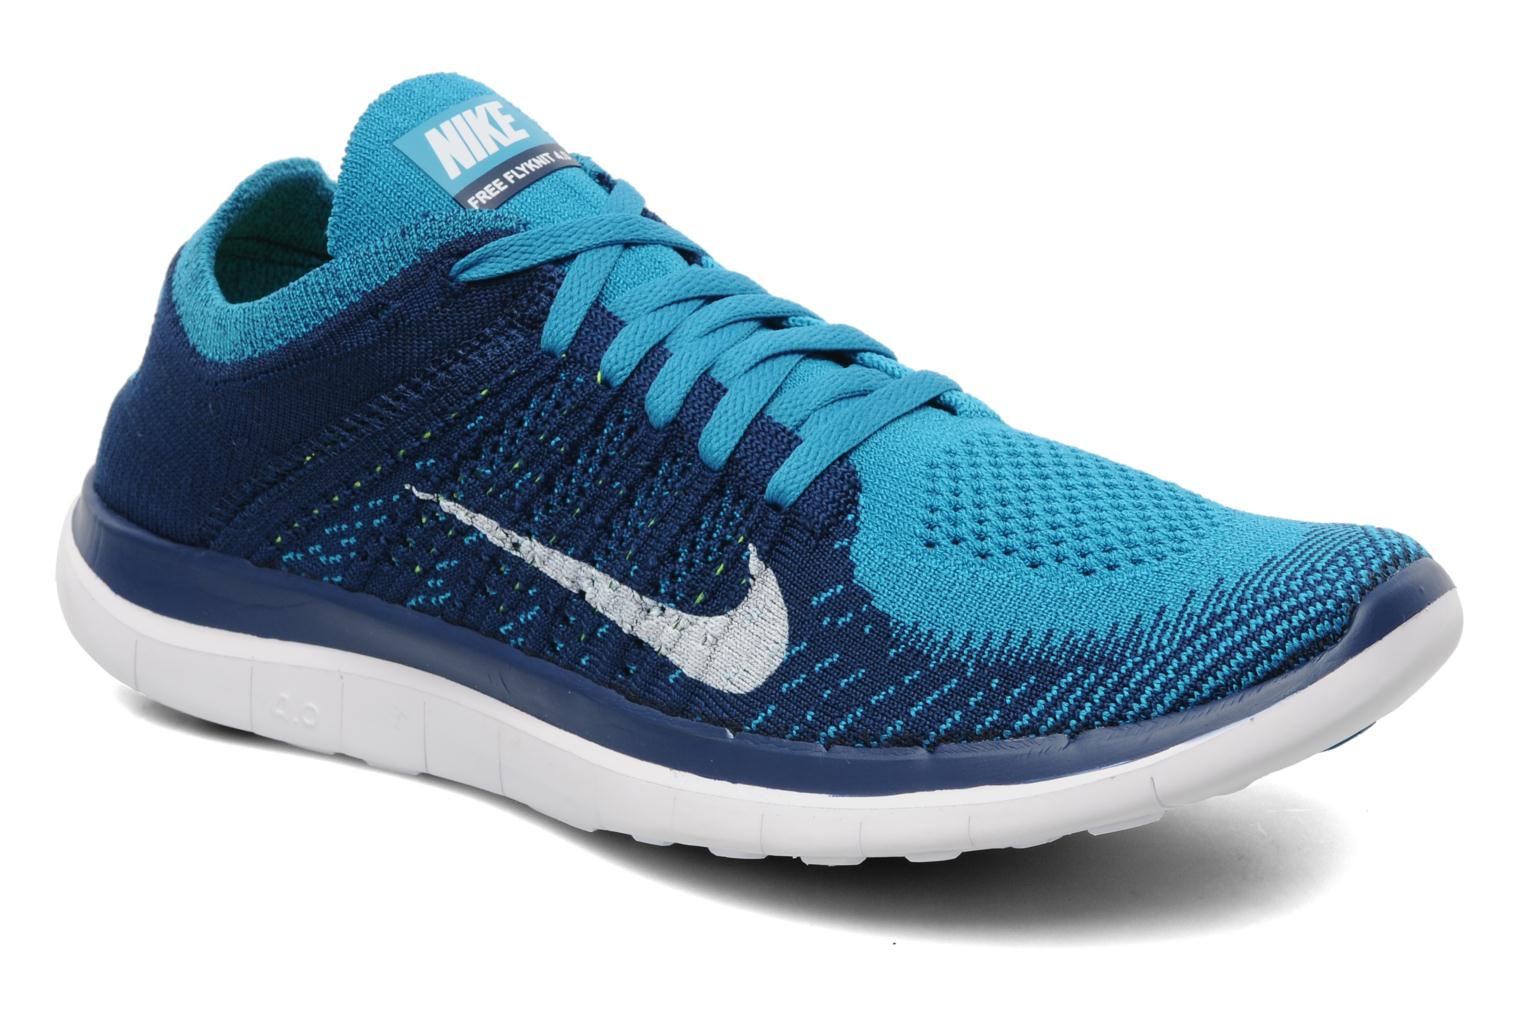 Nike Nike Free 4.0 Flyknit Sport shoes in Blue at Sarenza.co.uk (186749)